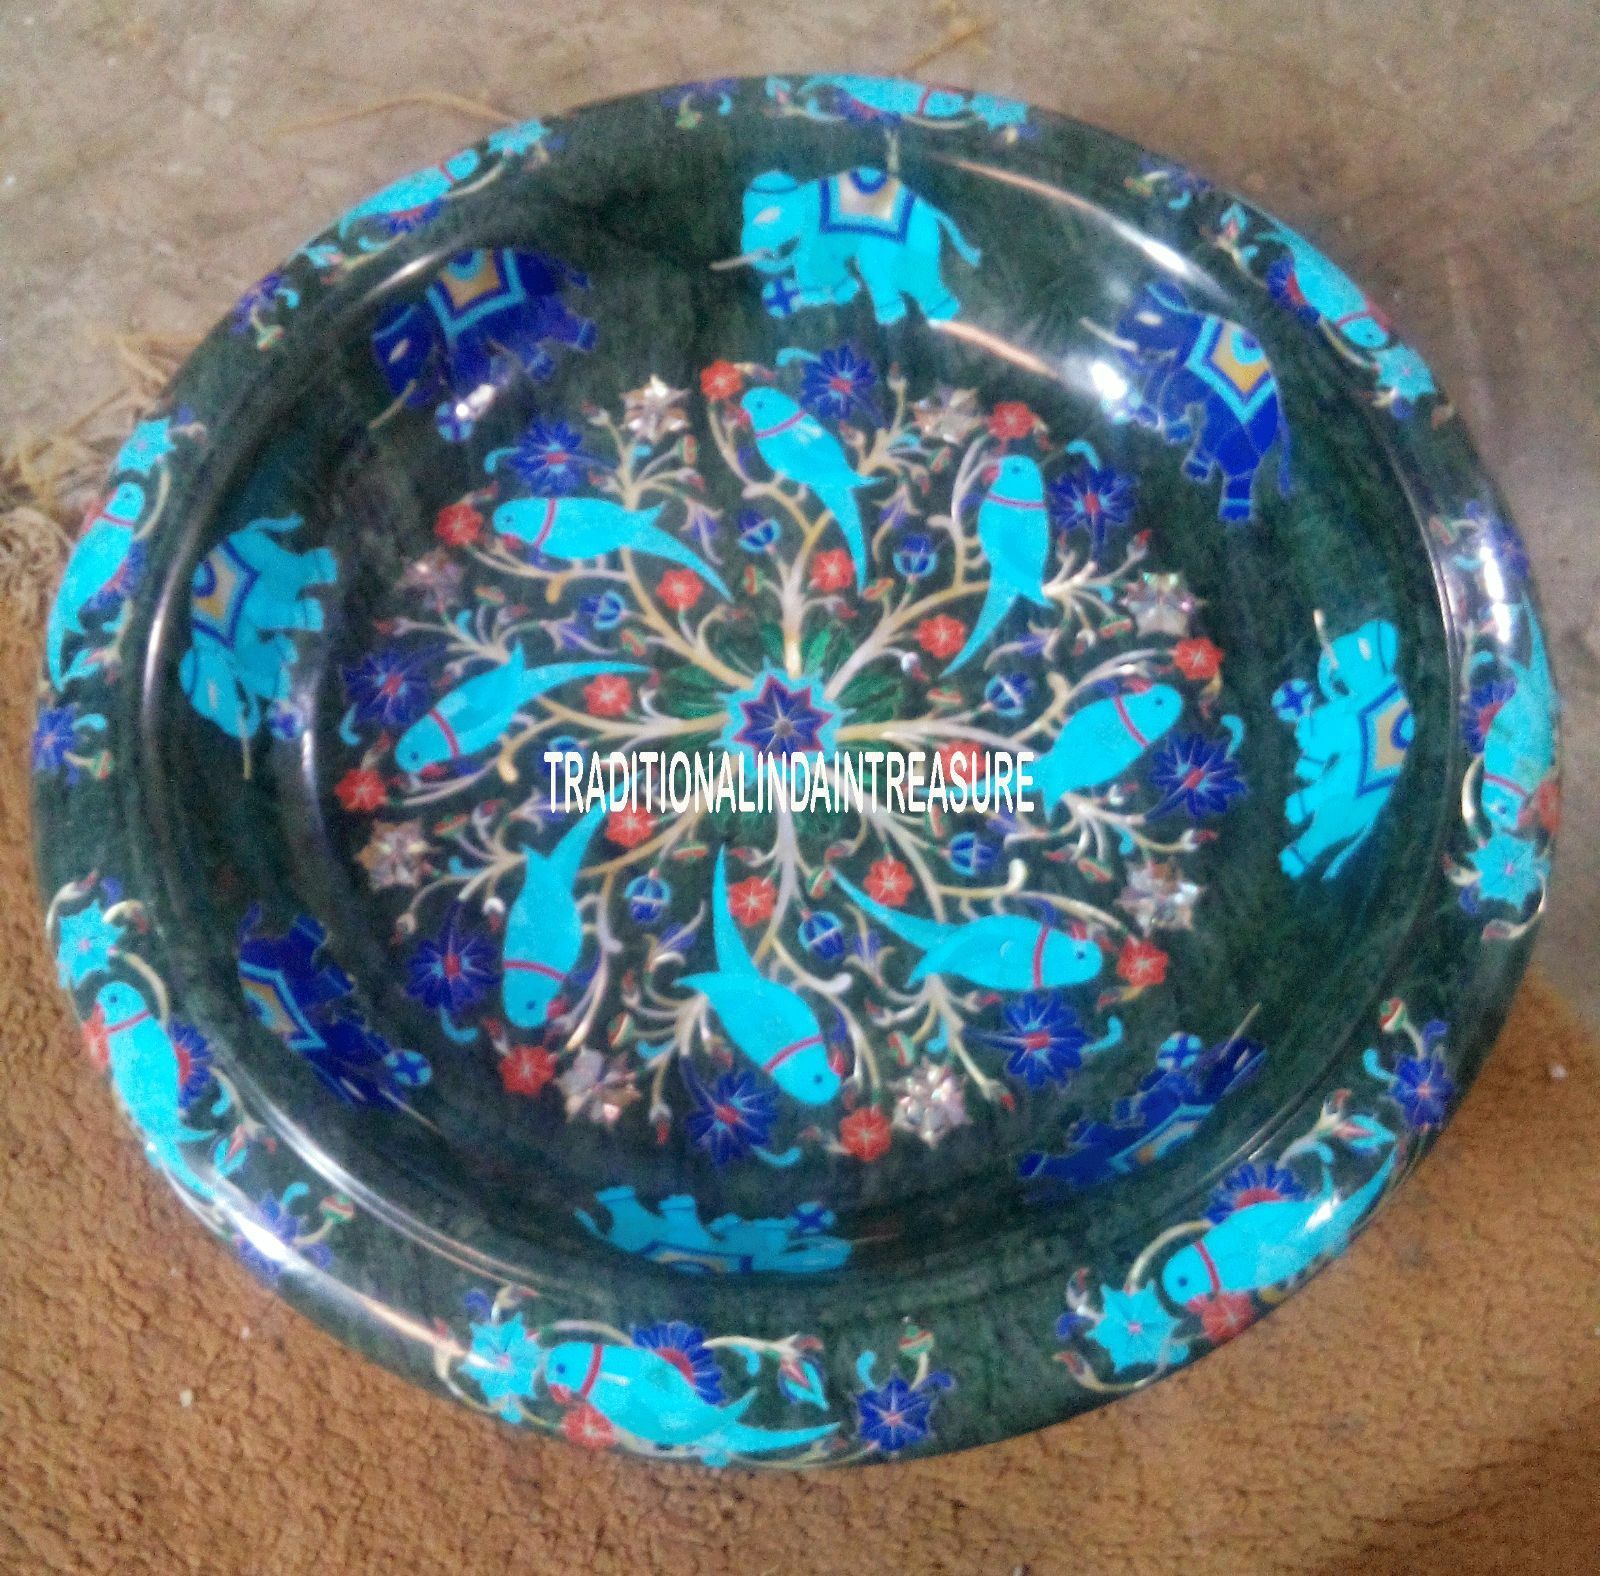 Primary image for 12" Black Marble Bowl Turquoise Parrot Elephant Multi Inlay Floral Design Decor